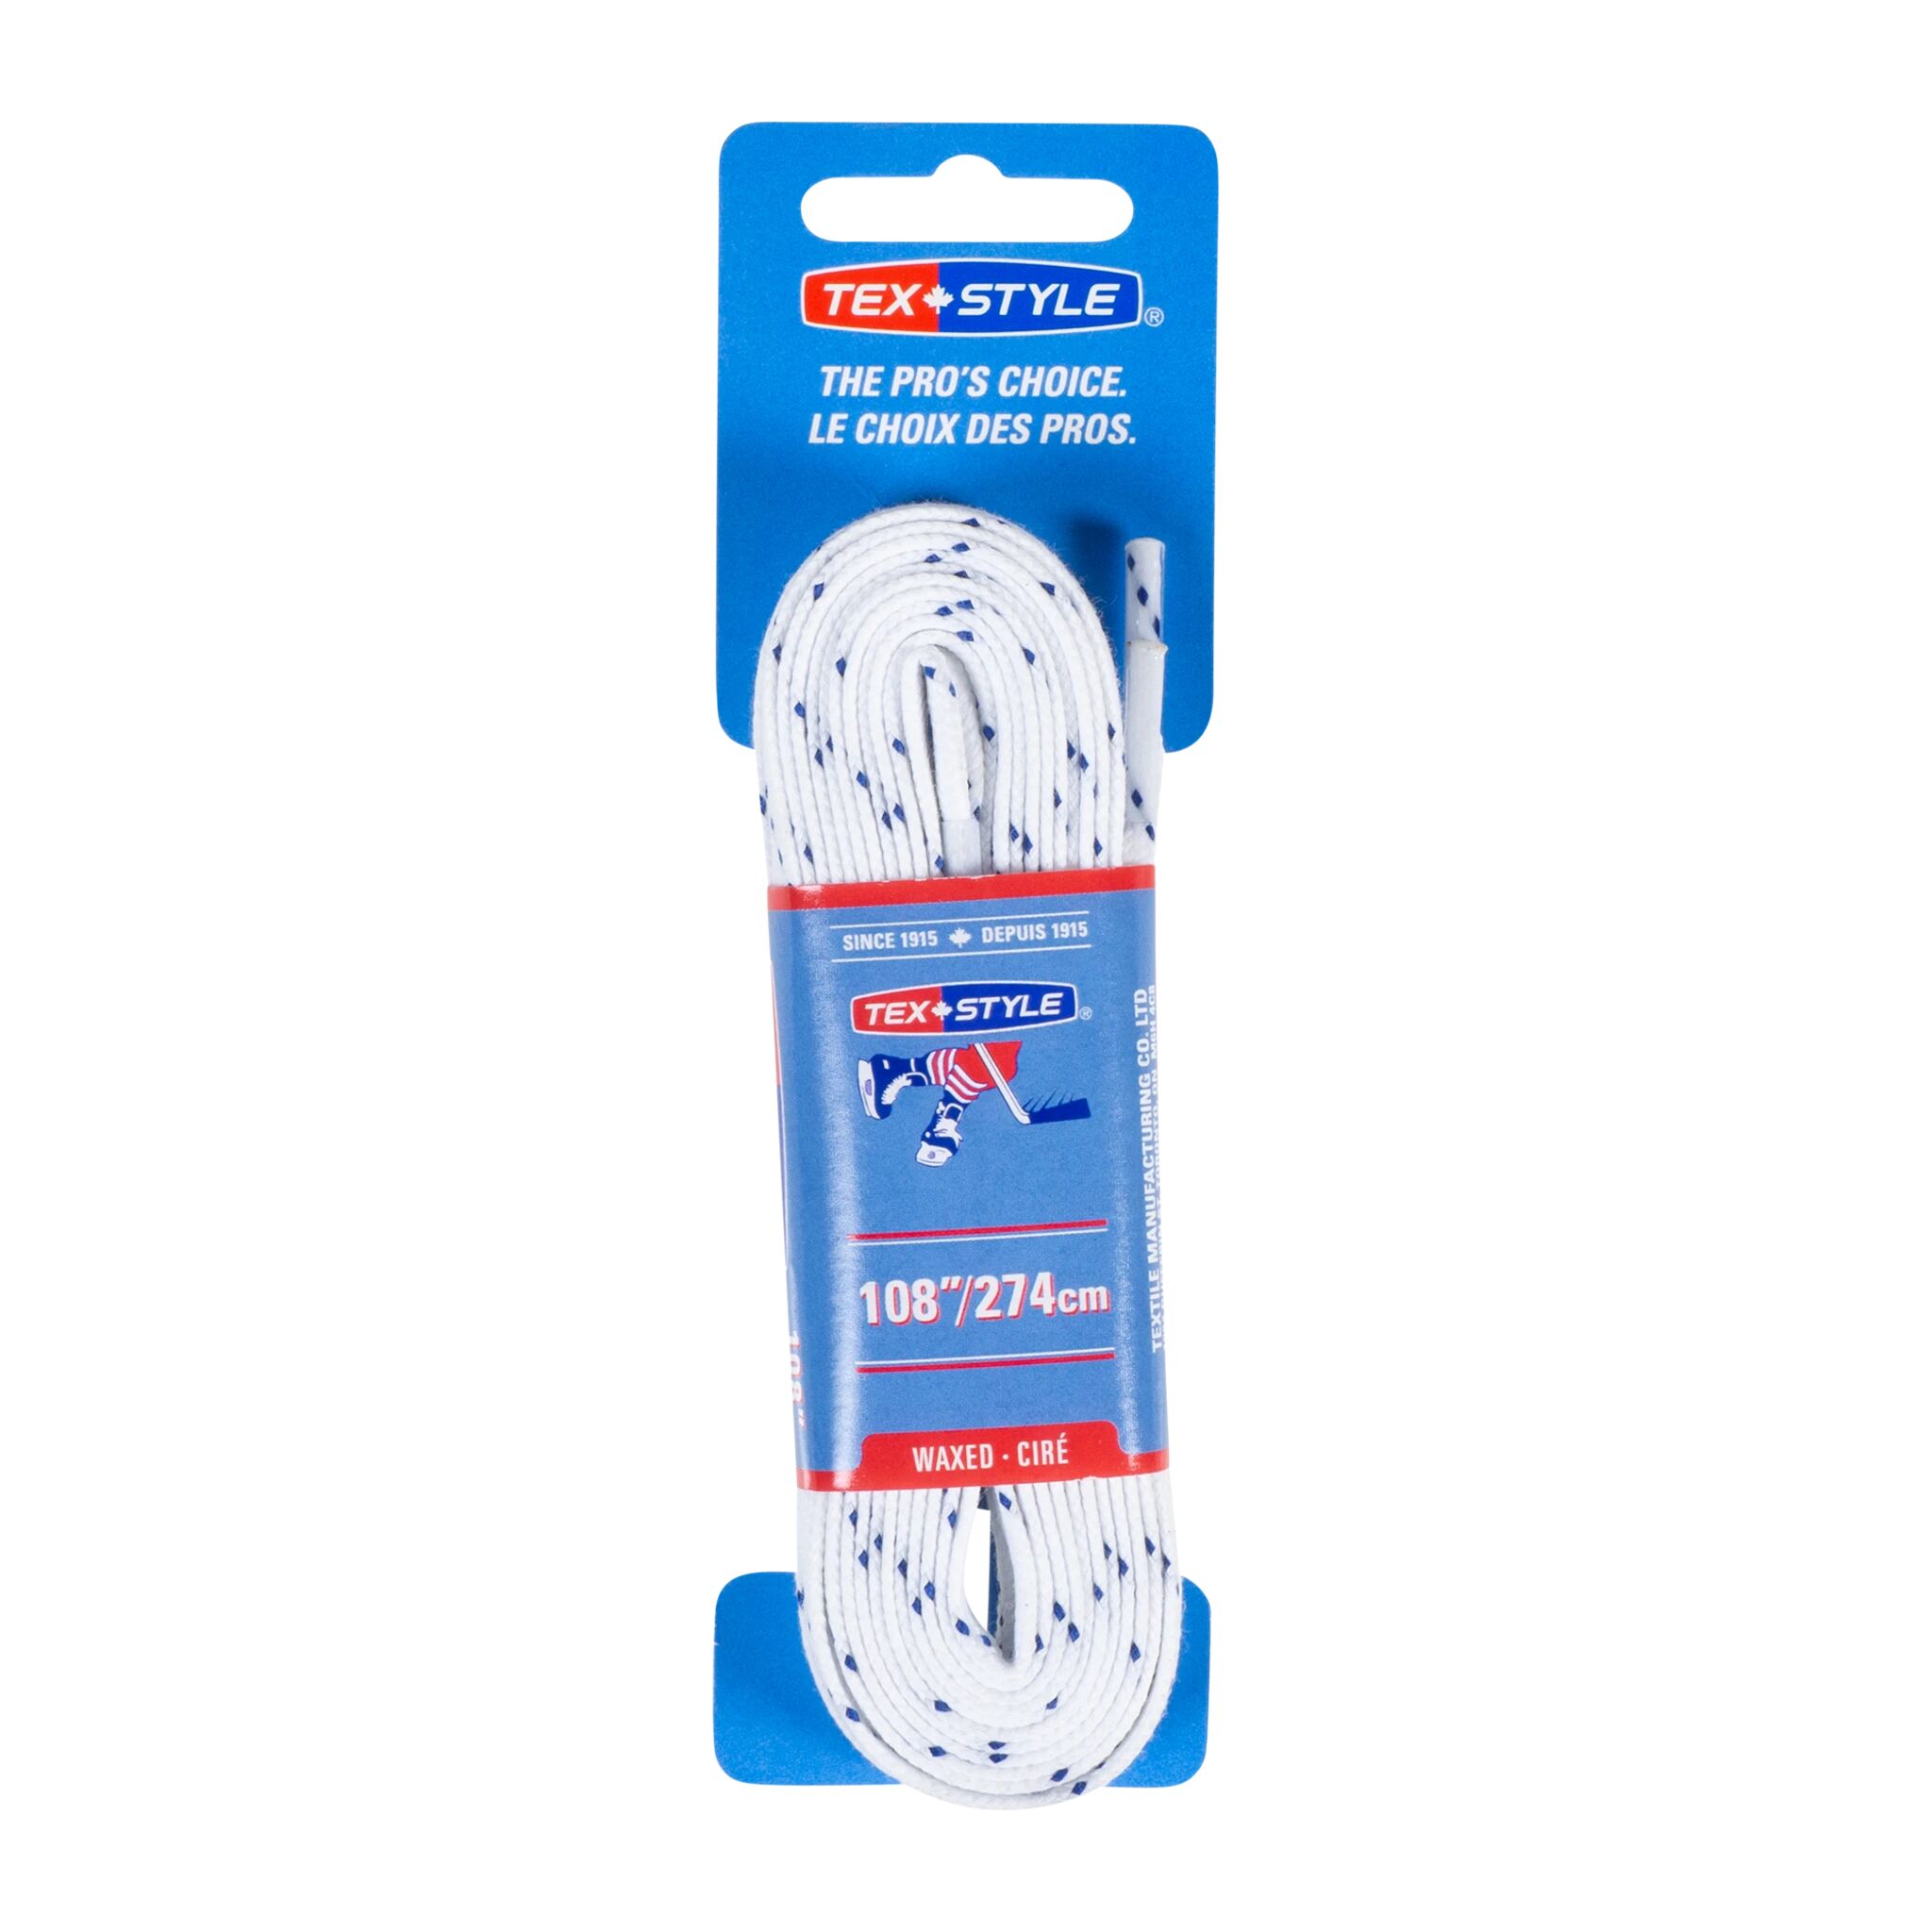 Texstyle waxed Laces 274cm white 36 pack-21/22, voksede hockeylisser 274cm STD